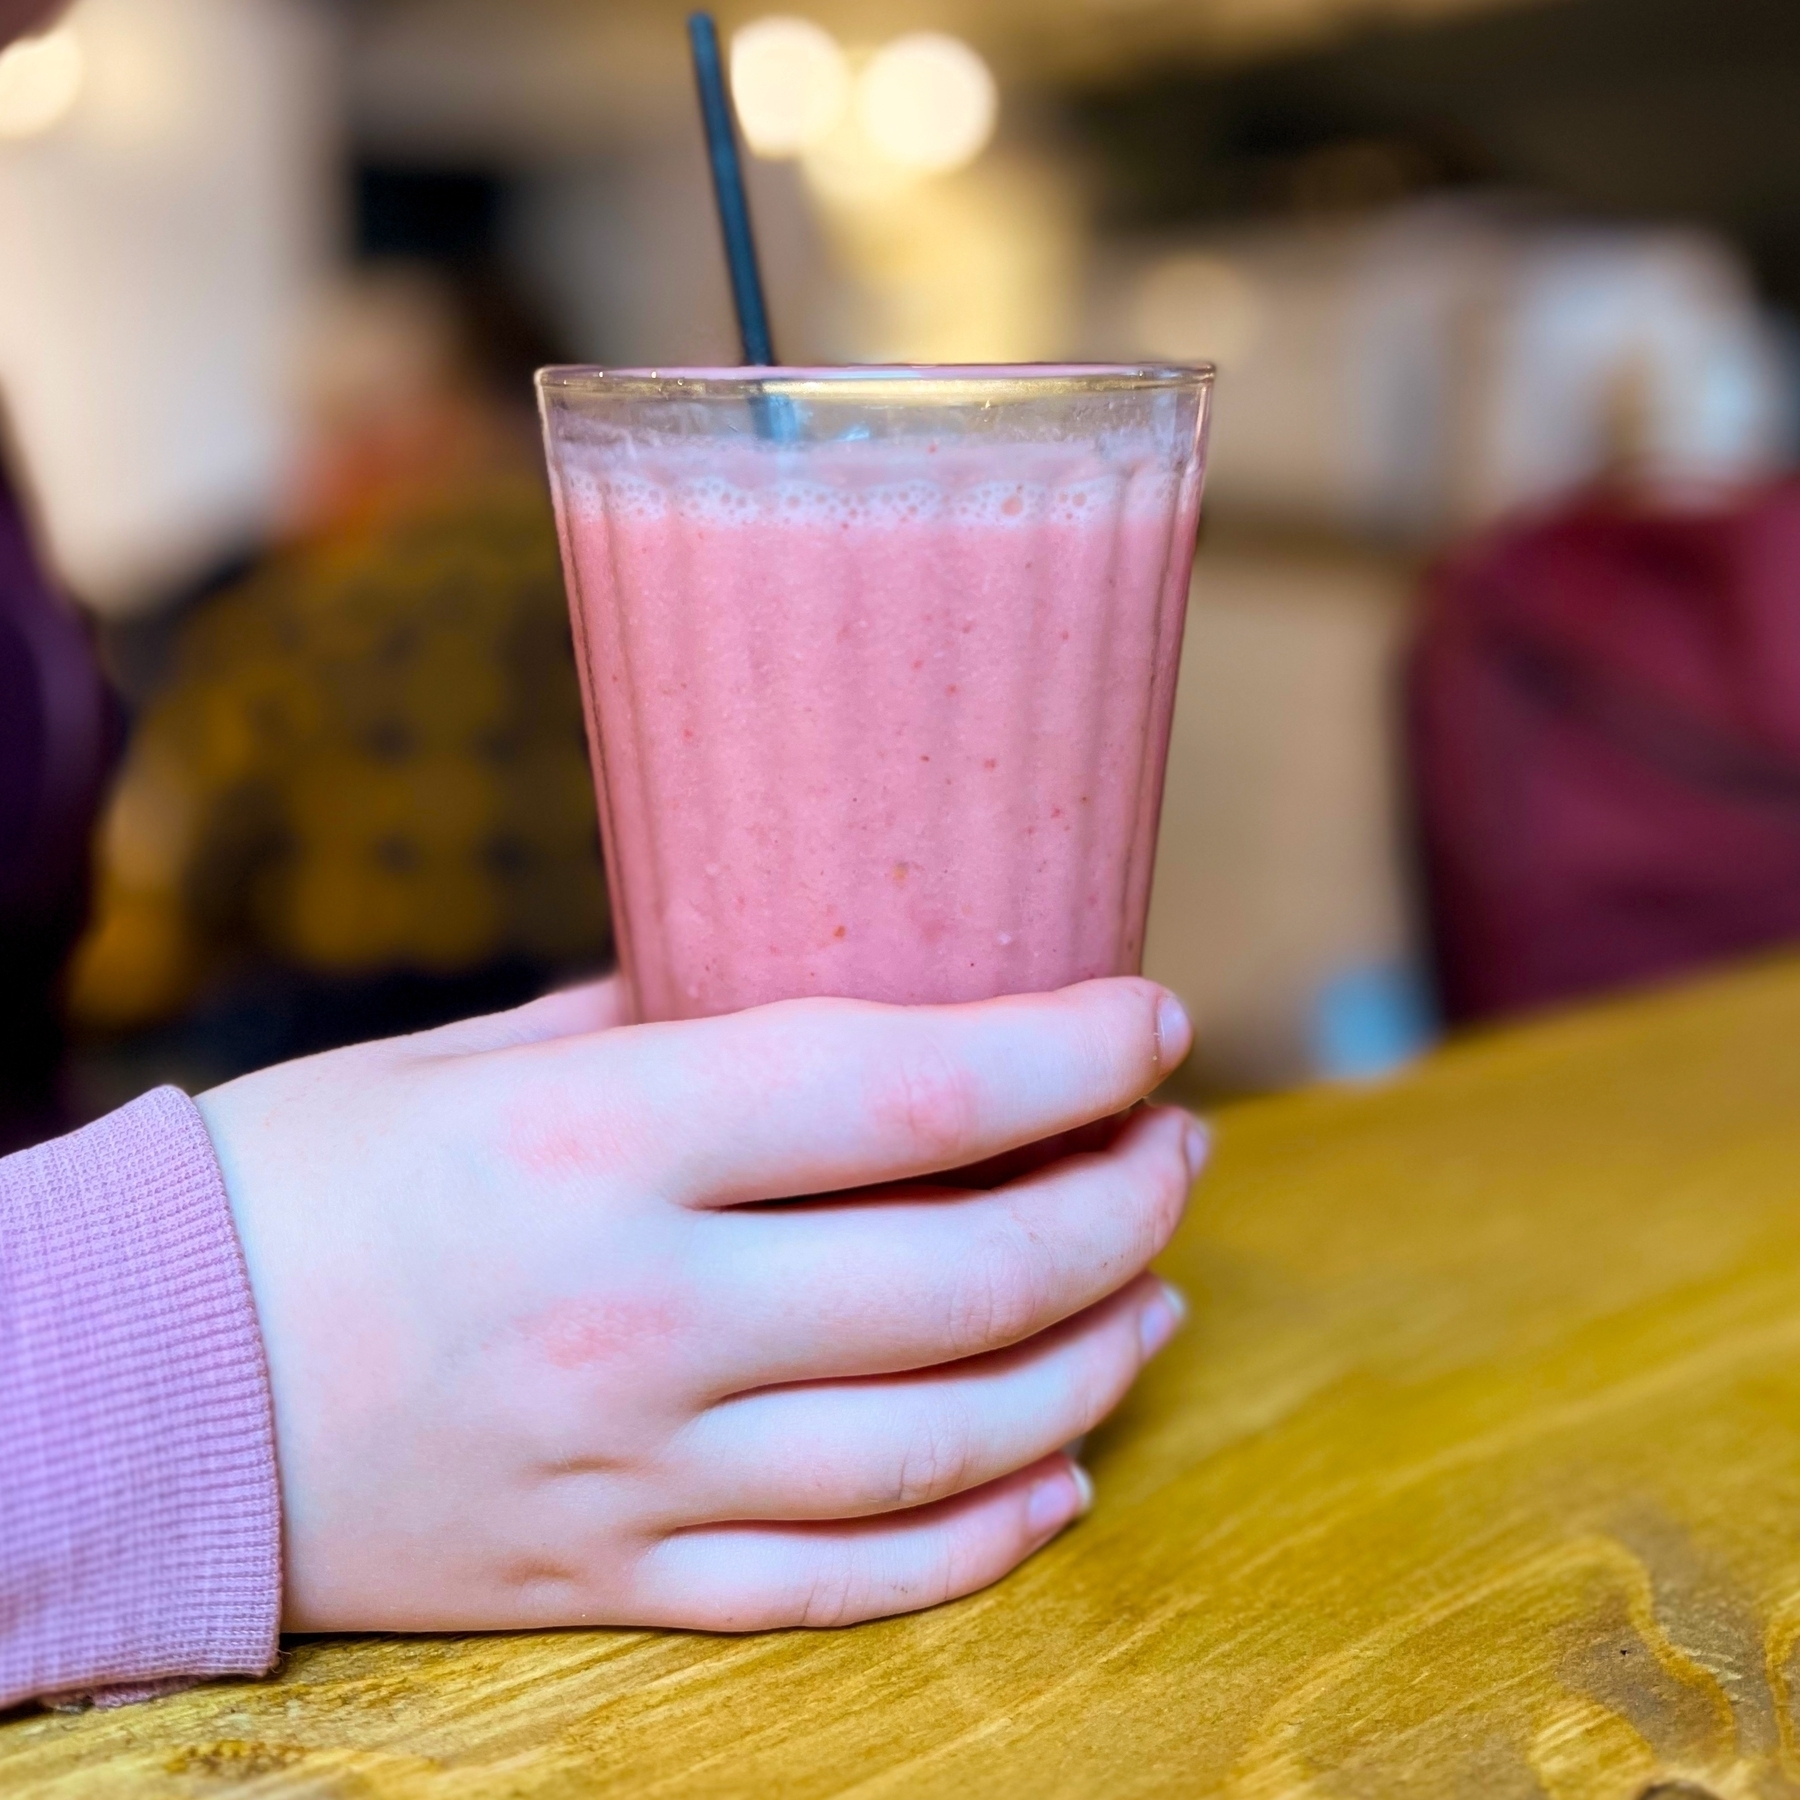 Smoothie of the banana and strawberry variety